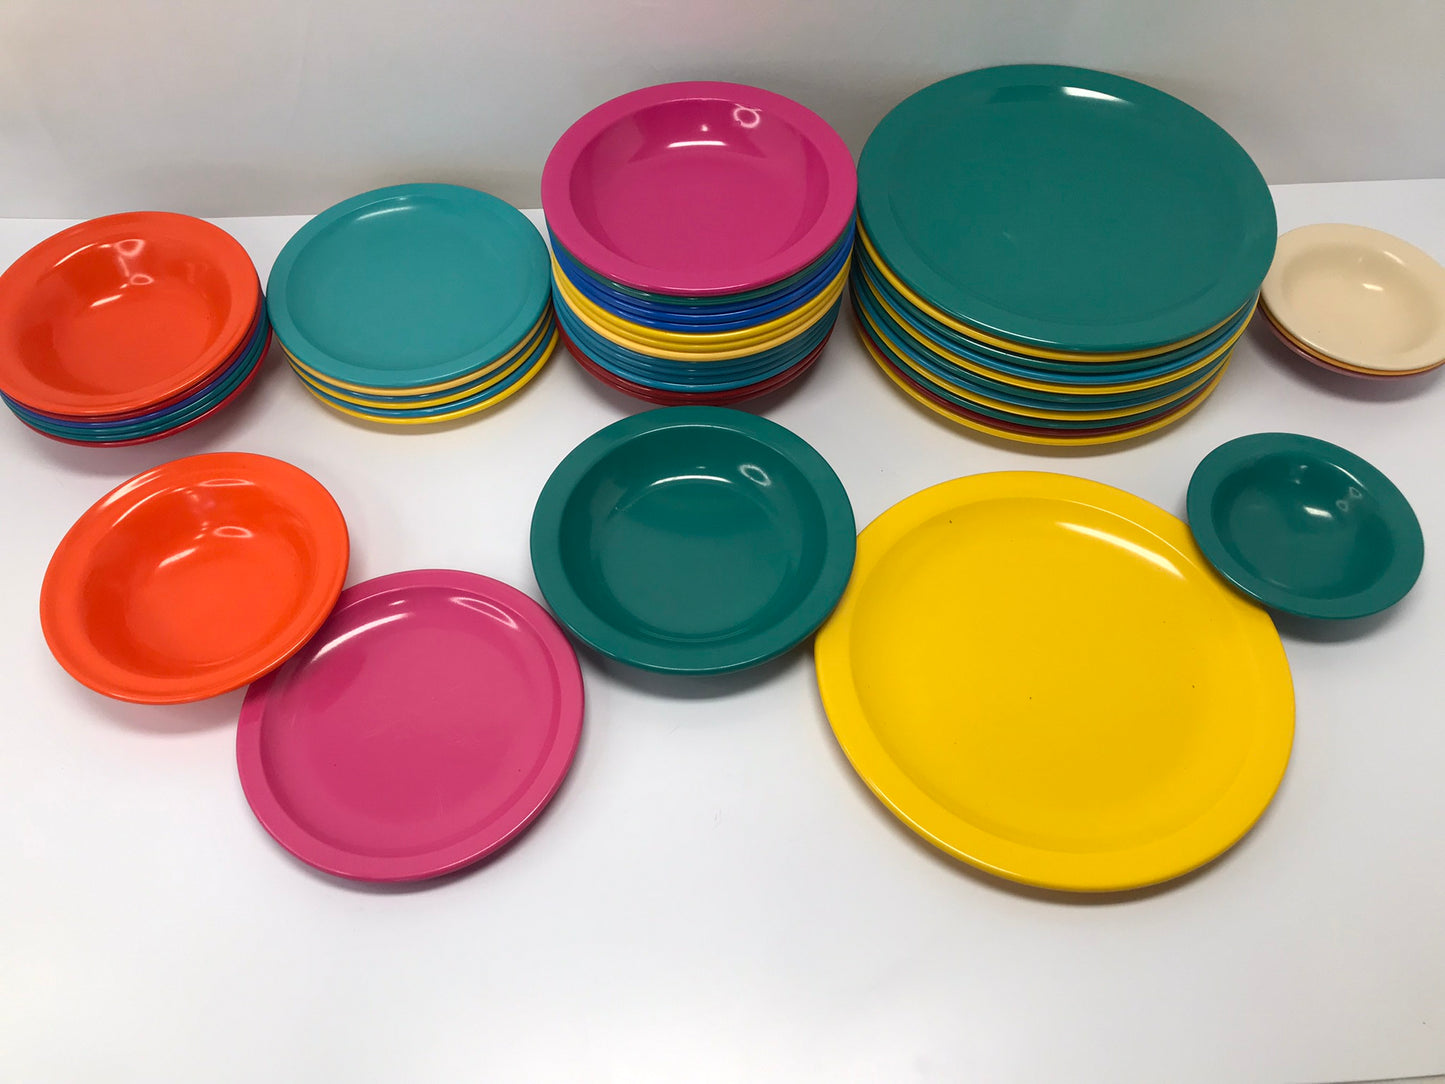 45 Pc 1970's  RARE Large Collection Texas Ware Melmac Camping Fishing Cabin Party Dishes 11 Small Bowls Are Vintage Mistral Made In Canada